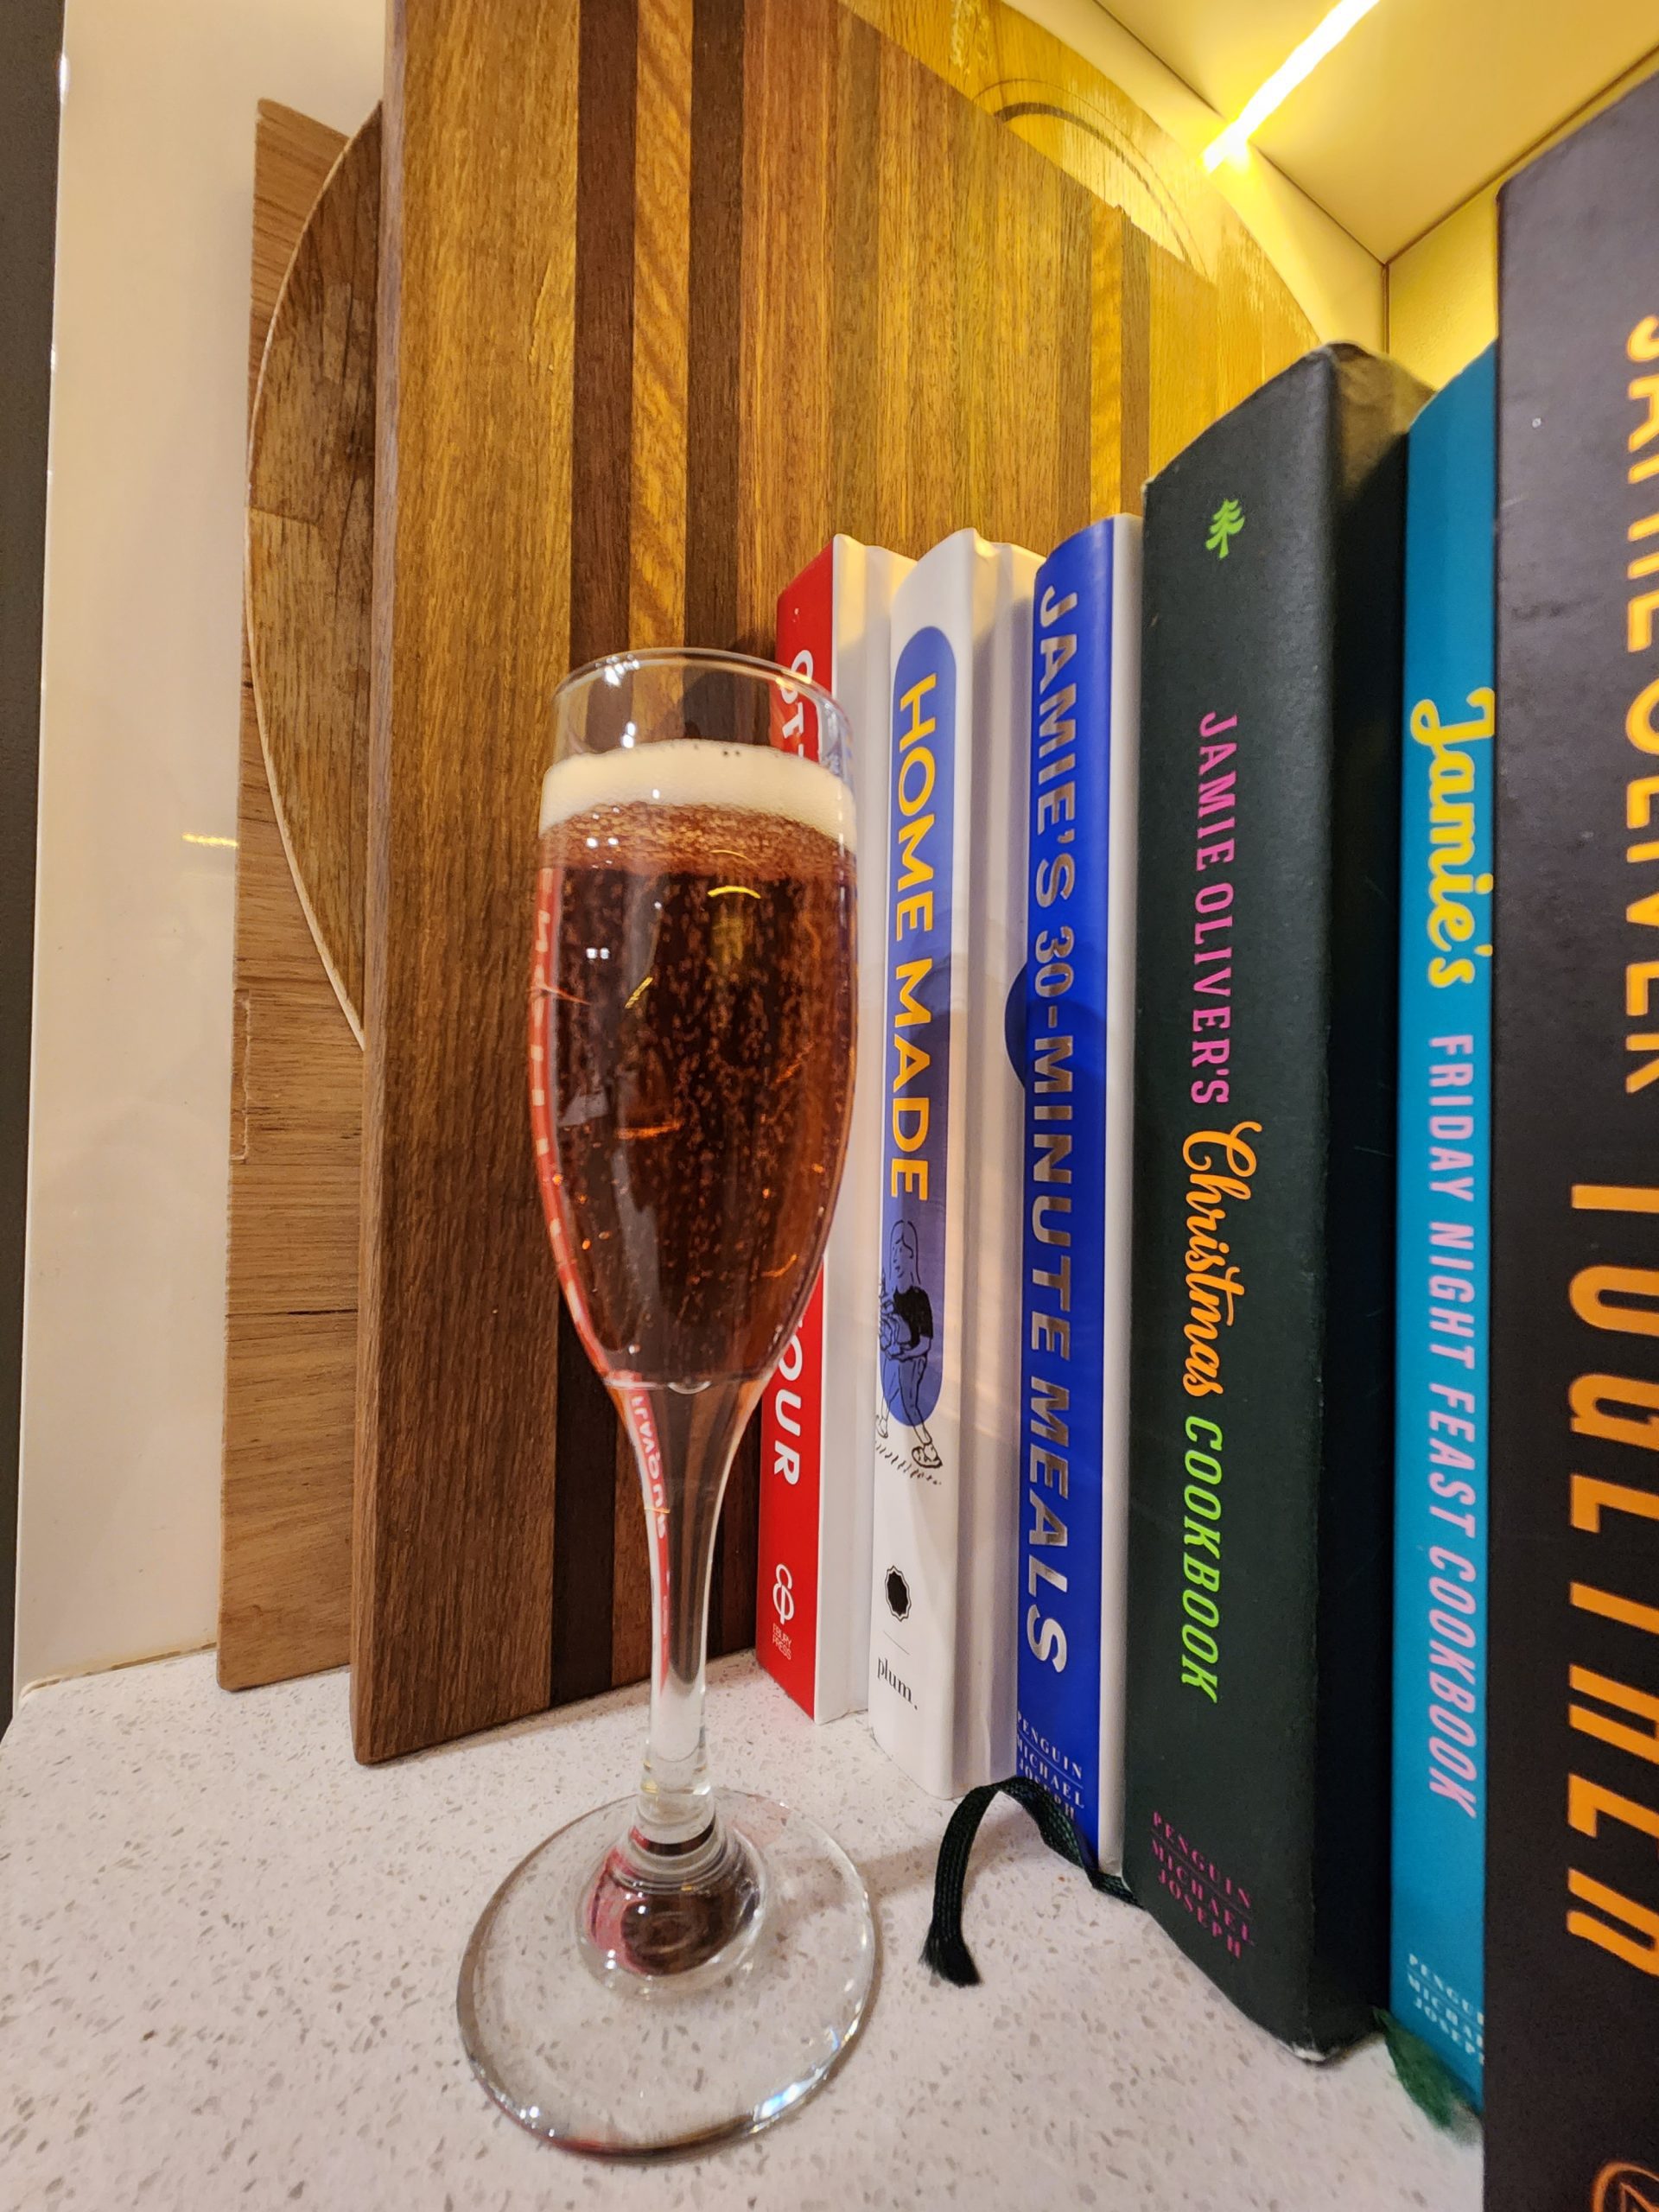 A Kir Royale cocktail in a Champagne flute.